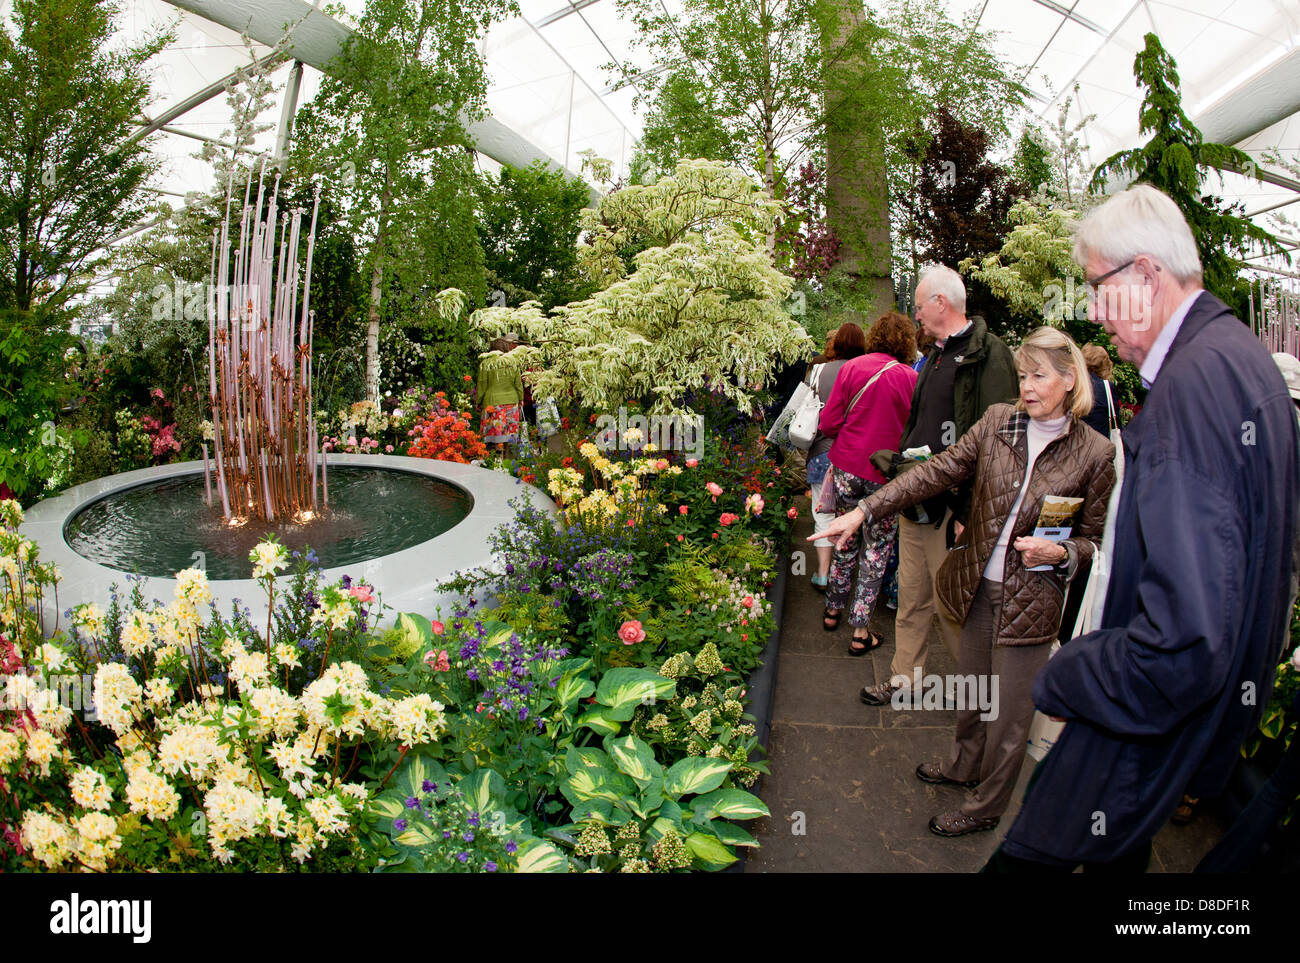 People Inside the Floral Pavilion At The Chelsea Flower Show London UK Stock Photo